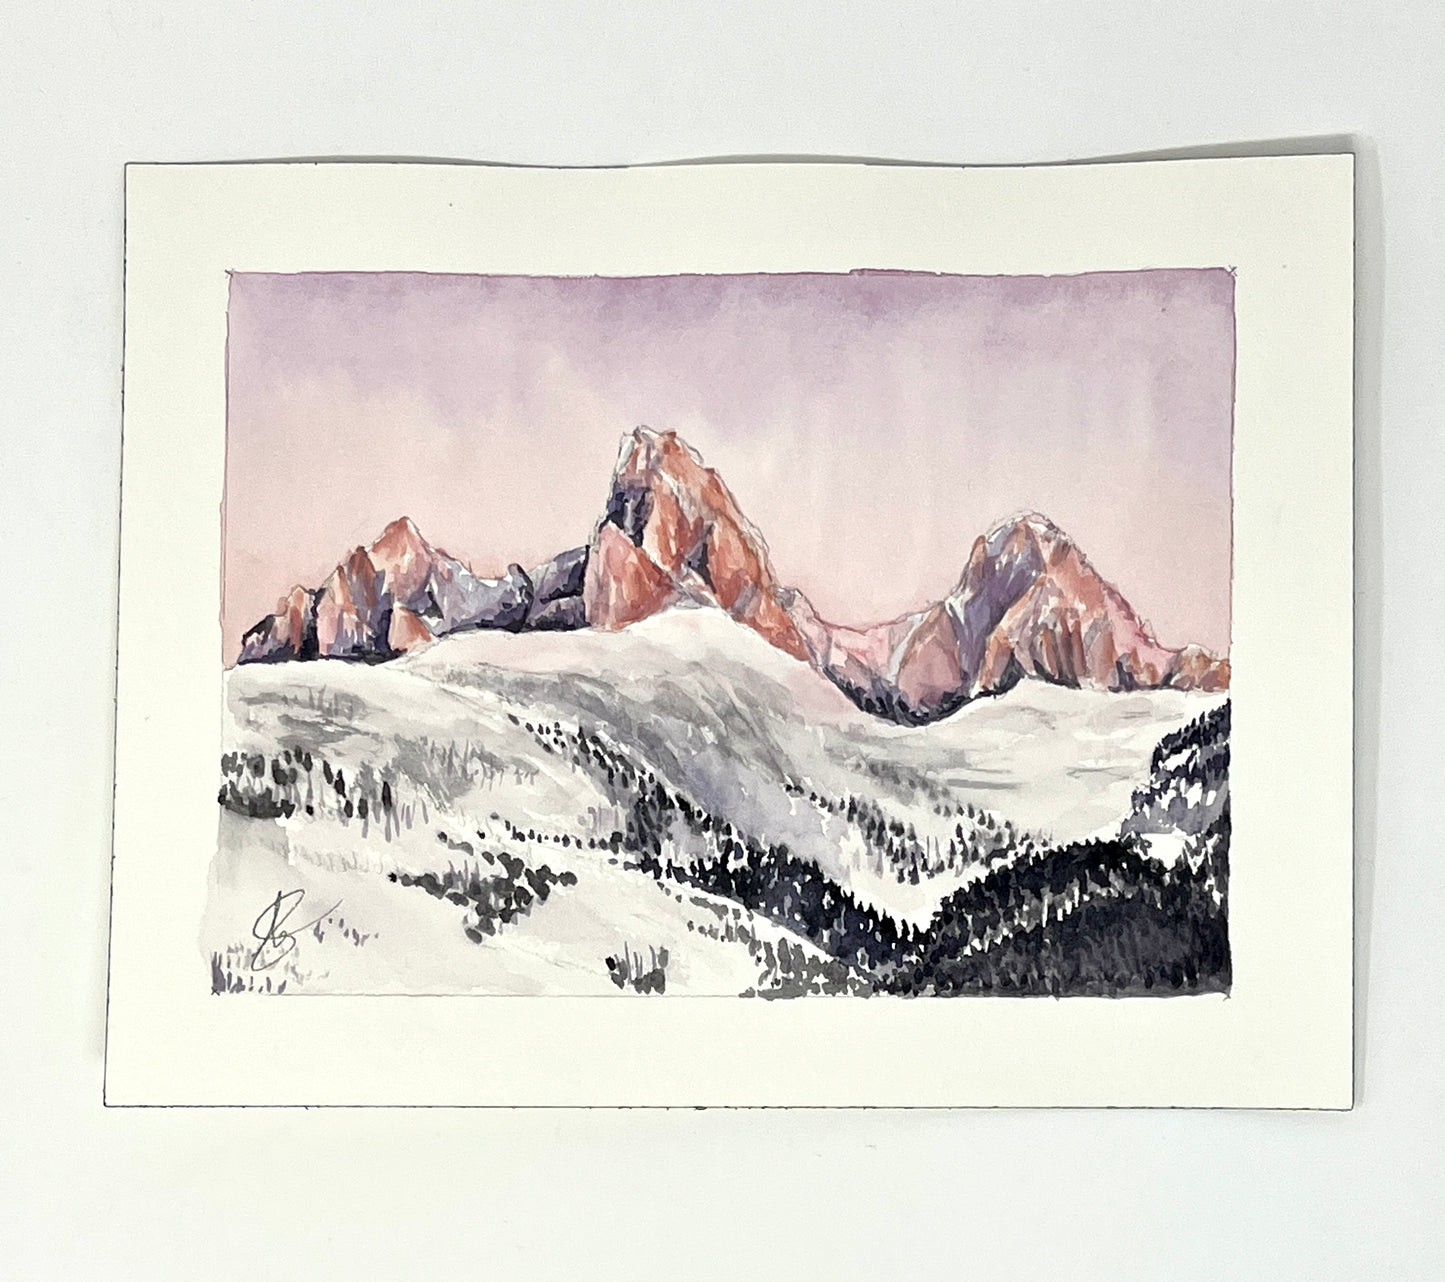 Natalie Connell: Watercolor 8 x 10 inches (framed / unframed)